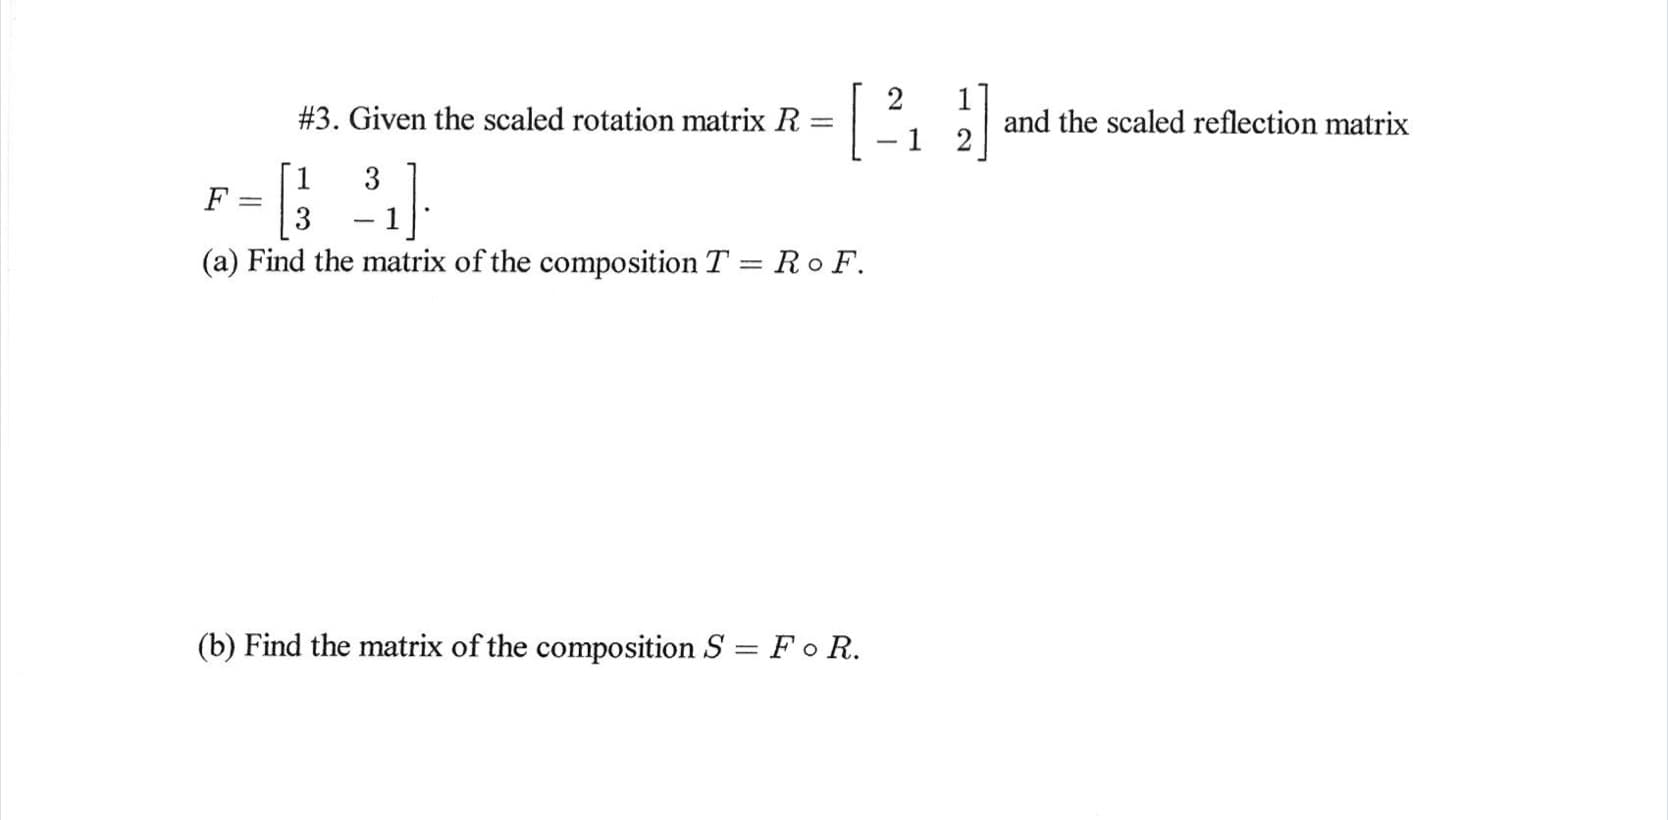 #3. Given the scaled rotation matrix R
and the scaled reflection matrix
-1 2
3
3
(a) Find the matrix of the composition T = Ro F.
(b) Find the matrix of the composition S = Fo R.
